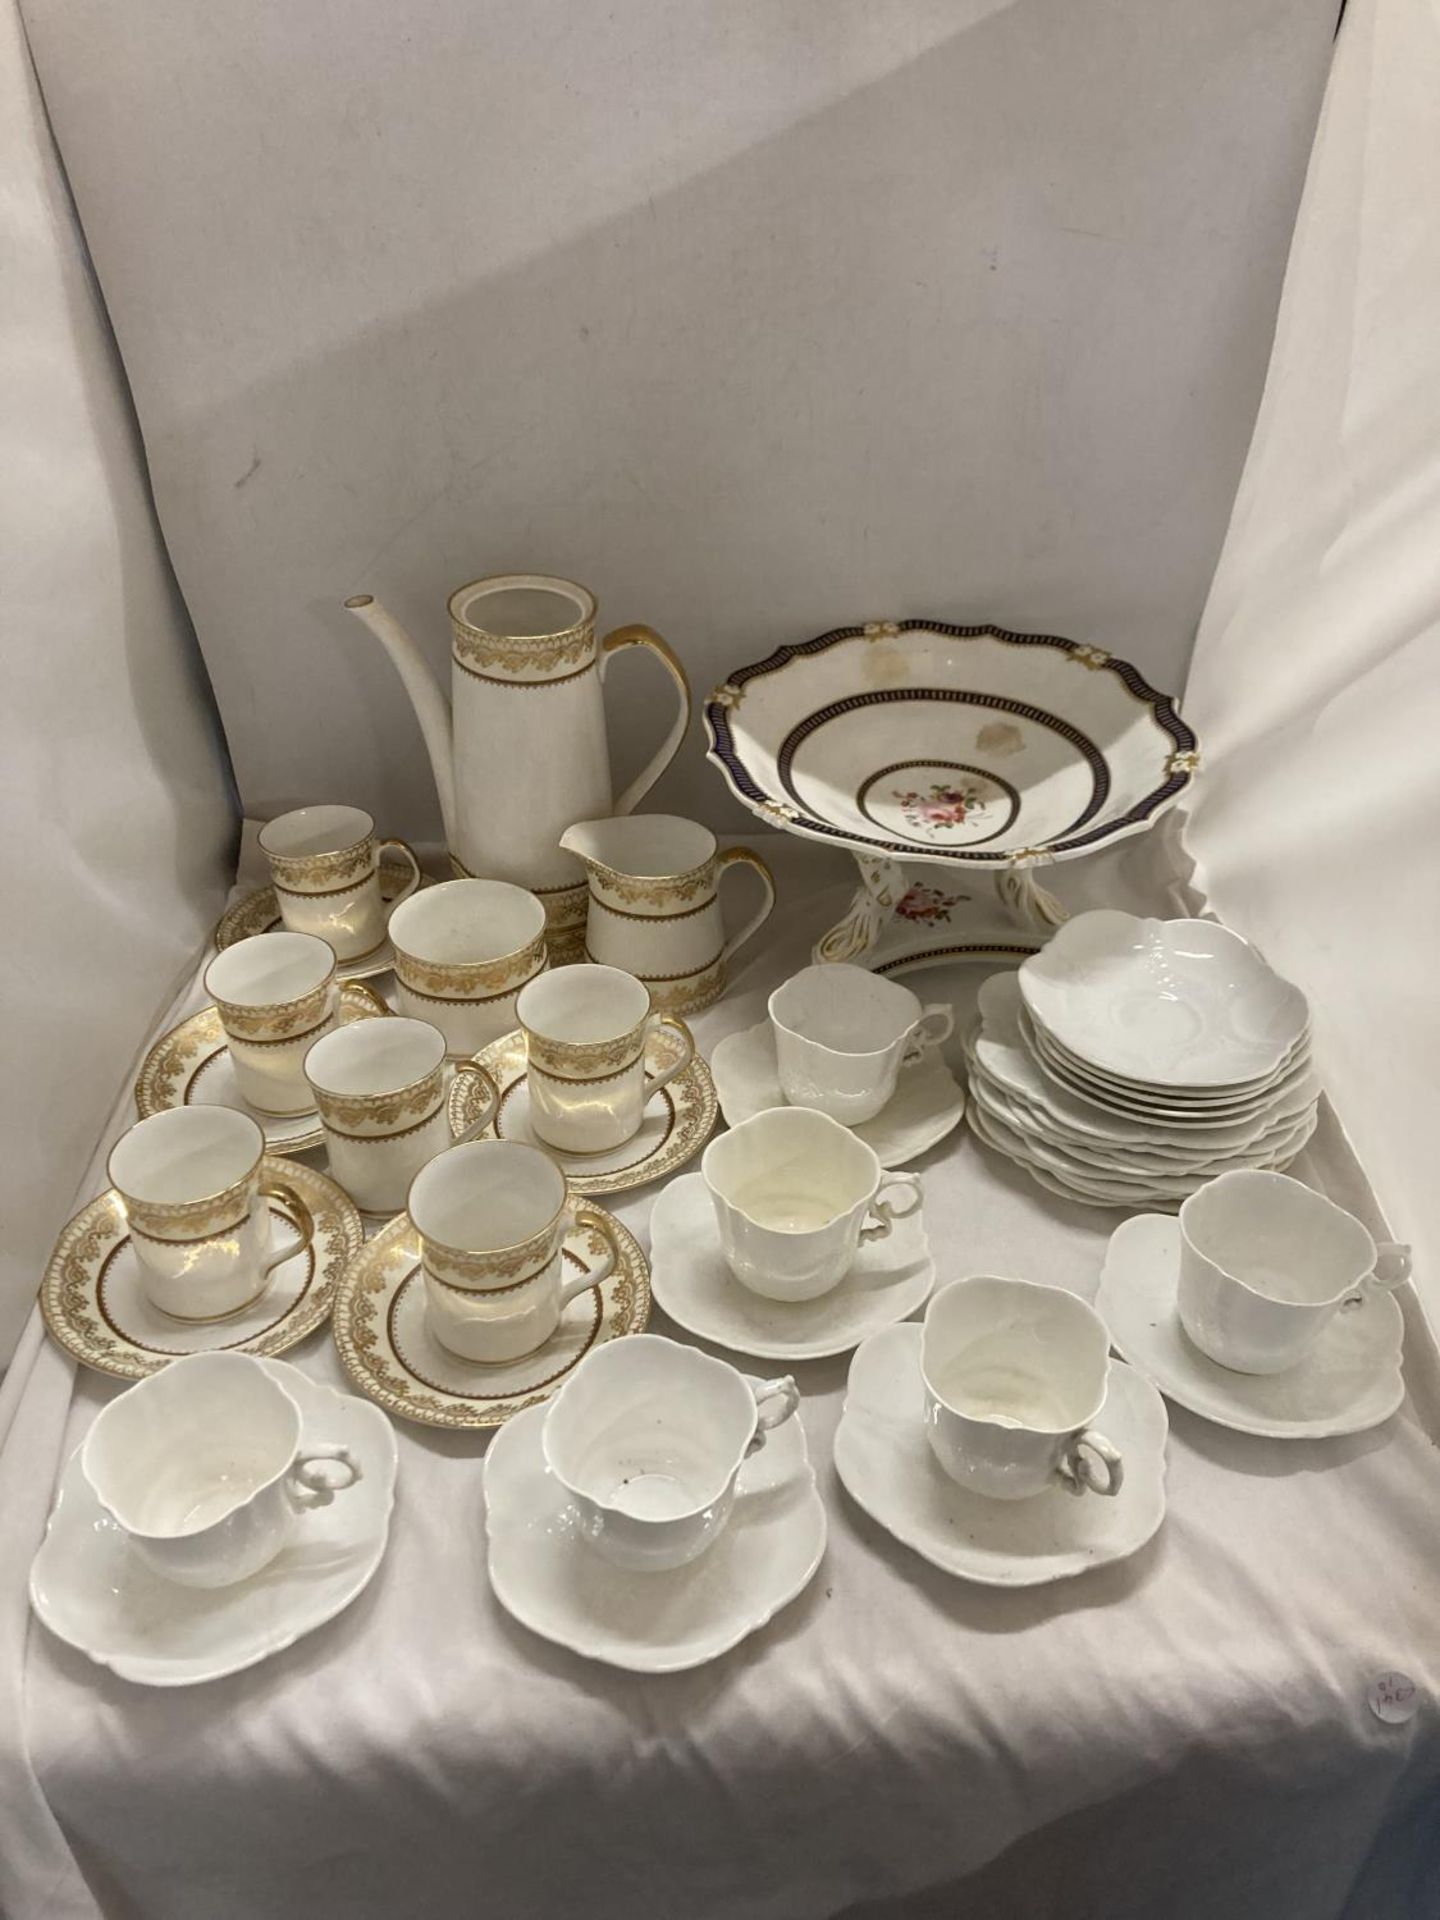 AN 'ELIZABETHAN' COFFEE SET TO INCLUDE A COFFEE POT, CREAM JUG, SUGAR BOWL, COFFEE CANS AND SAUCERS,